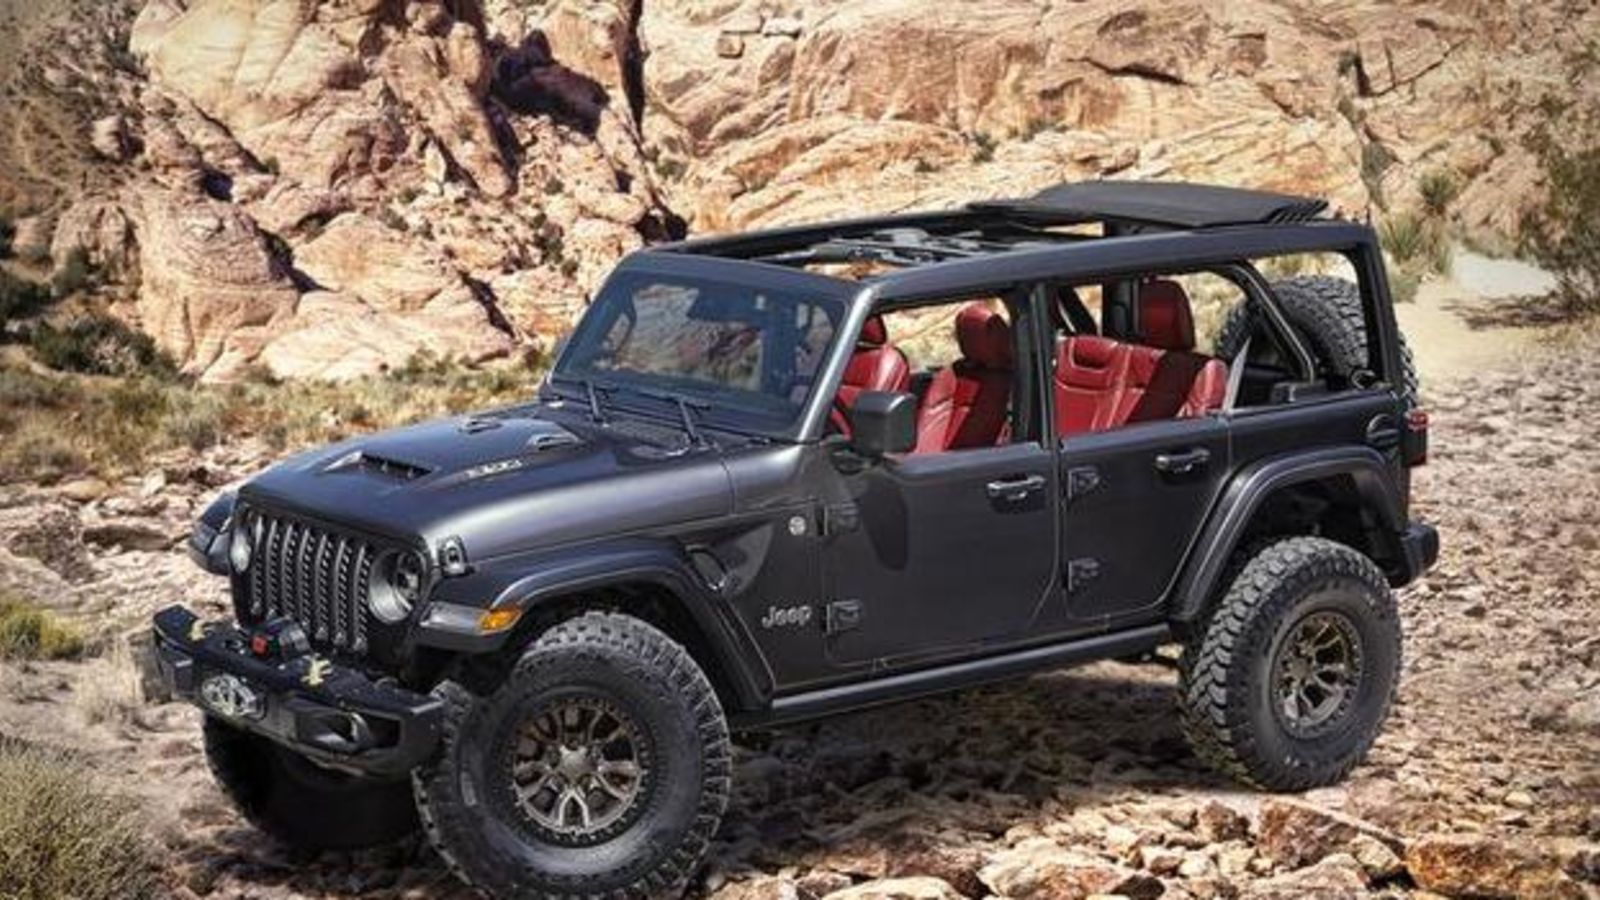 Illustration for article titled FCA announces new V8 Jeep, launch video inspired by Creed Shreds